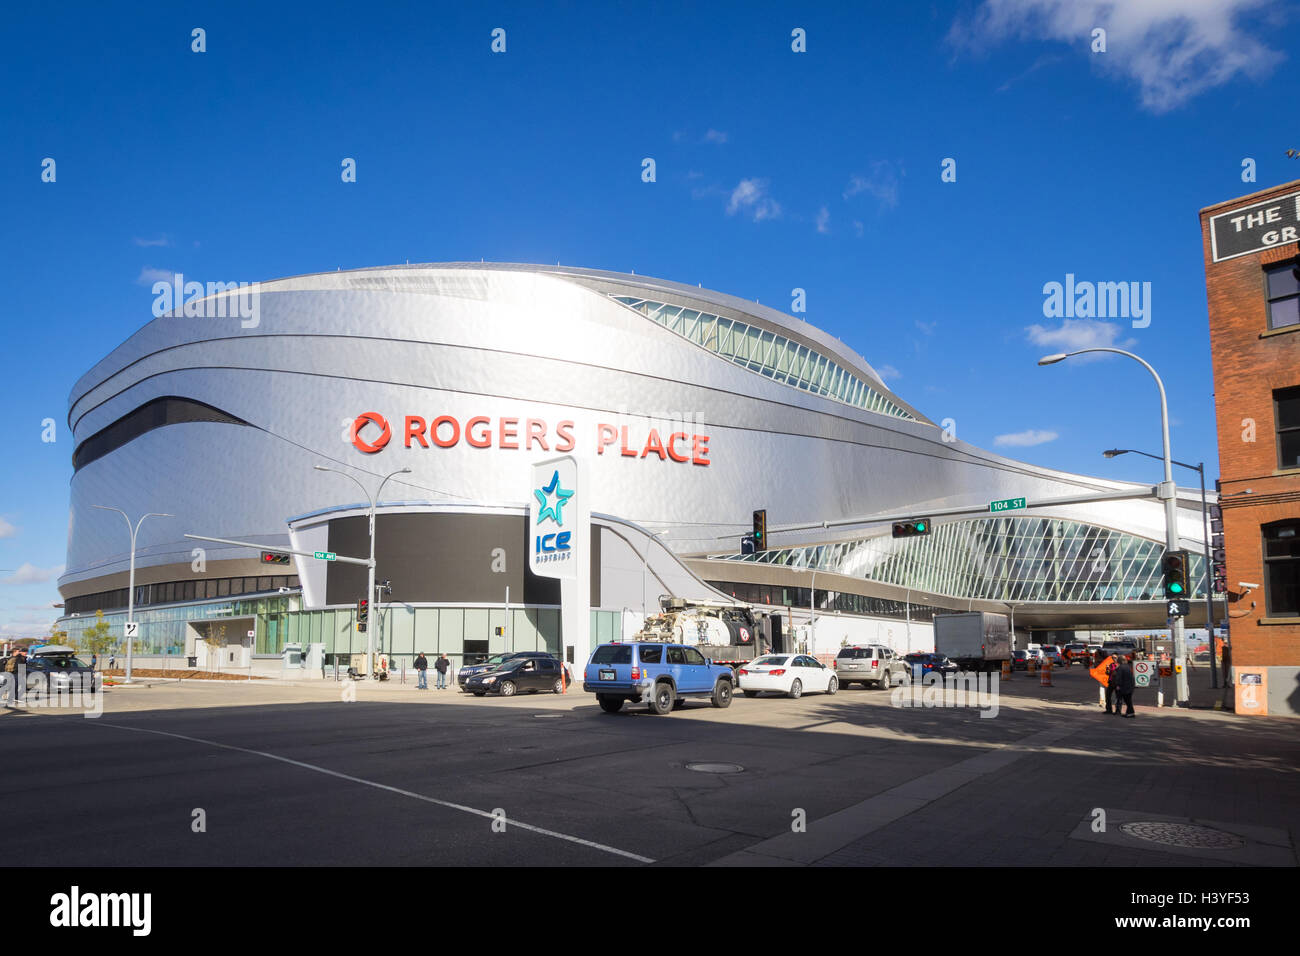 Rogers Place, a multi-use indoor arena in the Ice District of downtown Edmonton, Alberta, Canada. Stock Photo